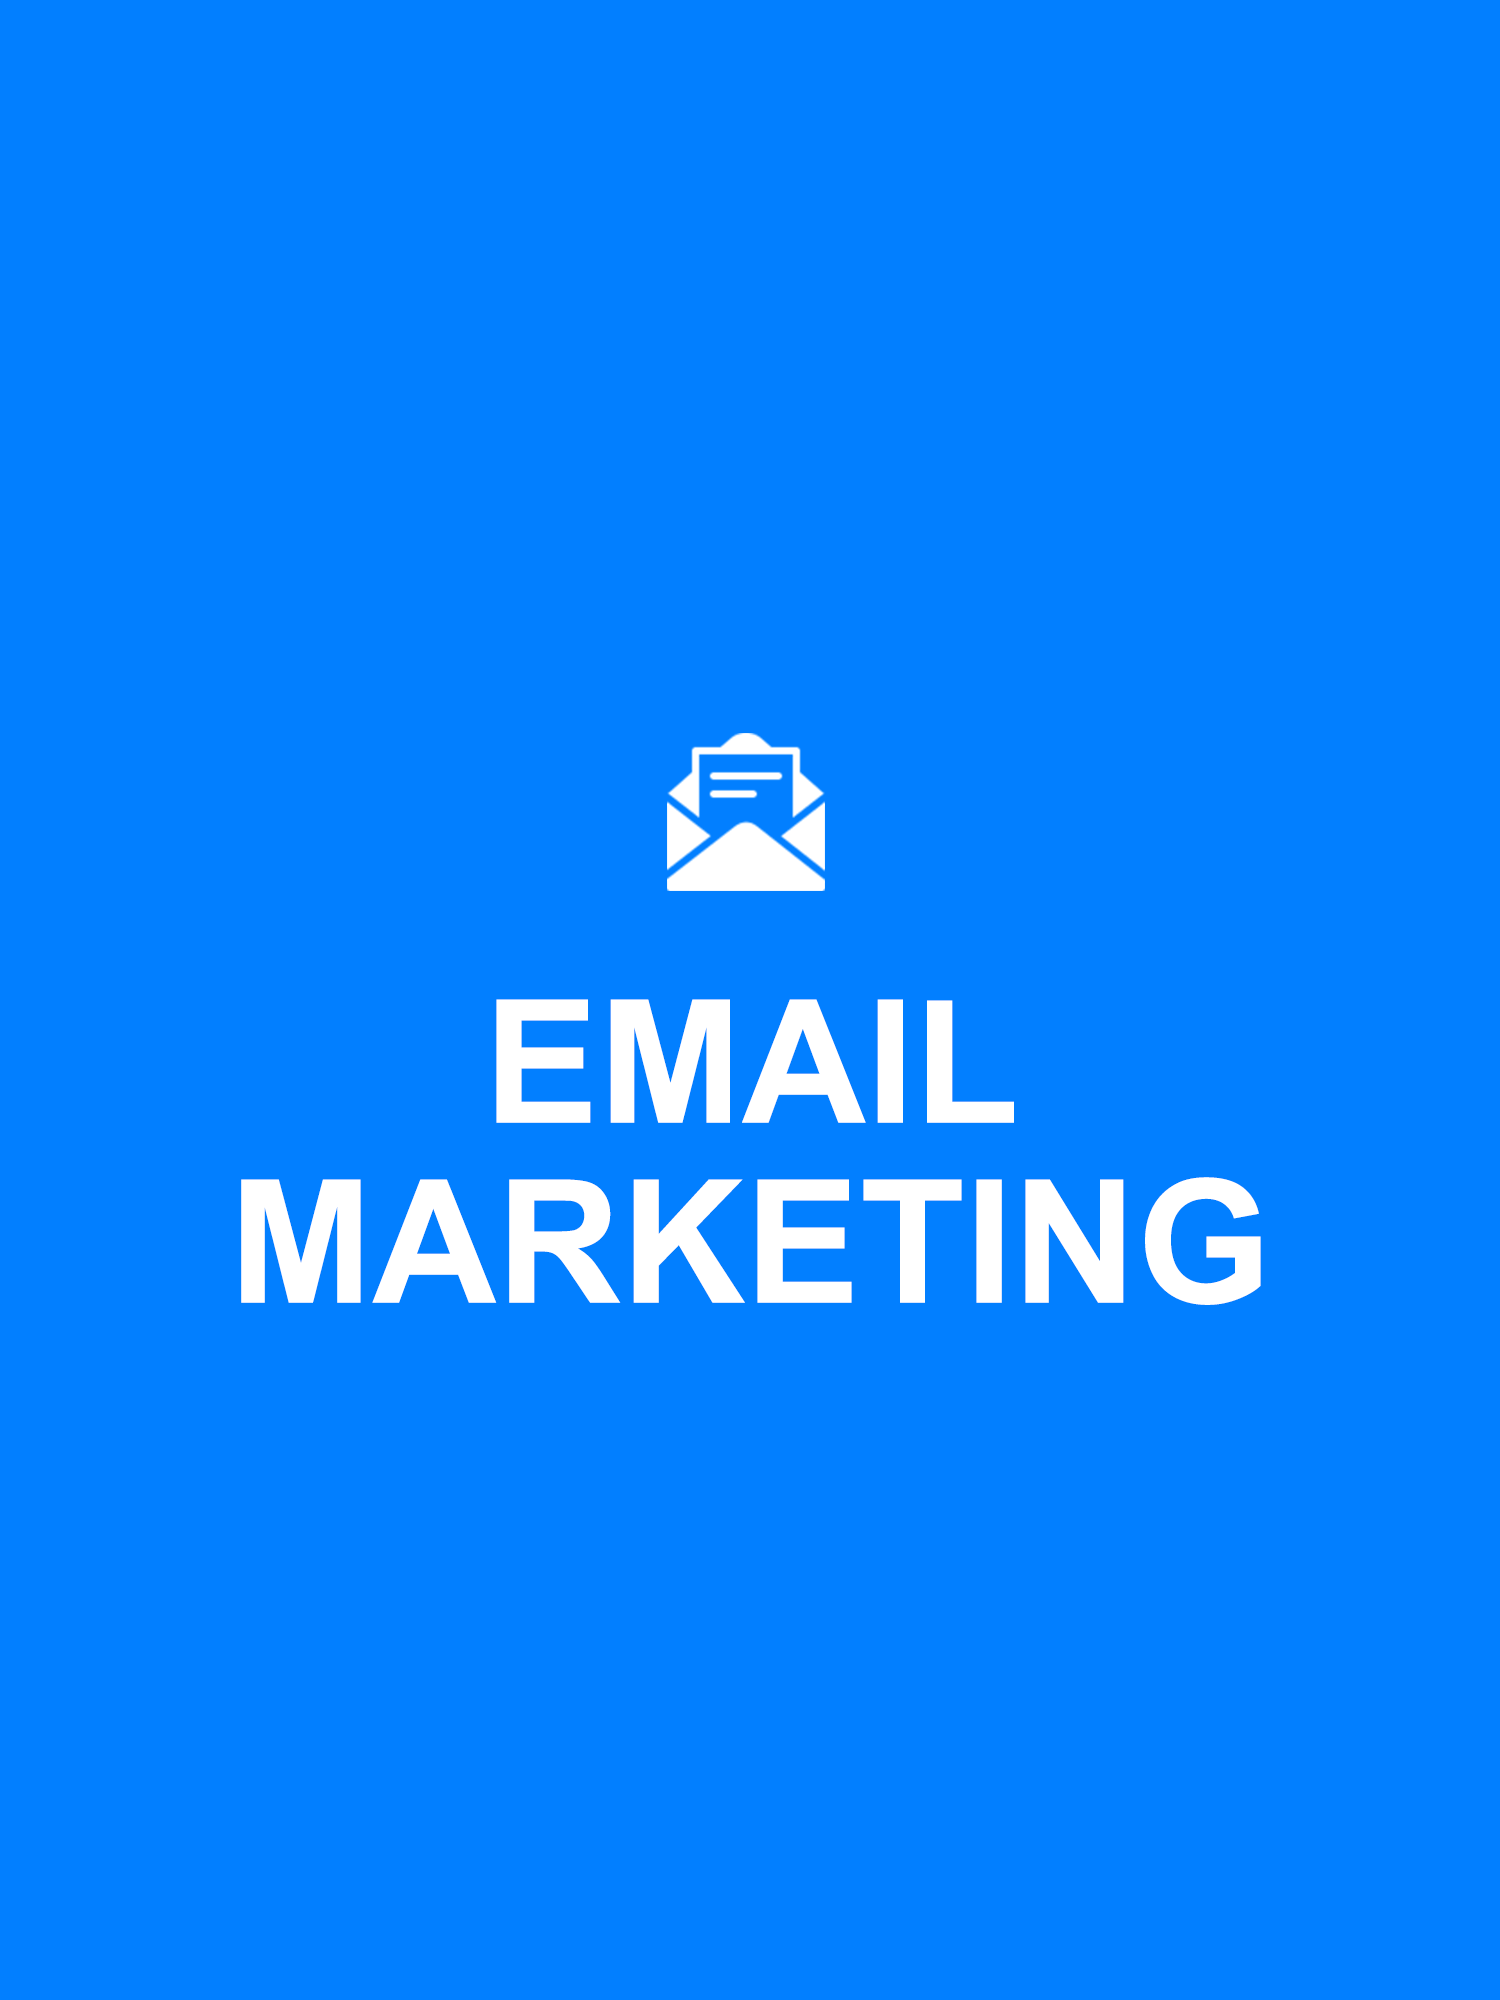 Email Marketing for dental clinics